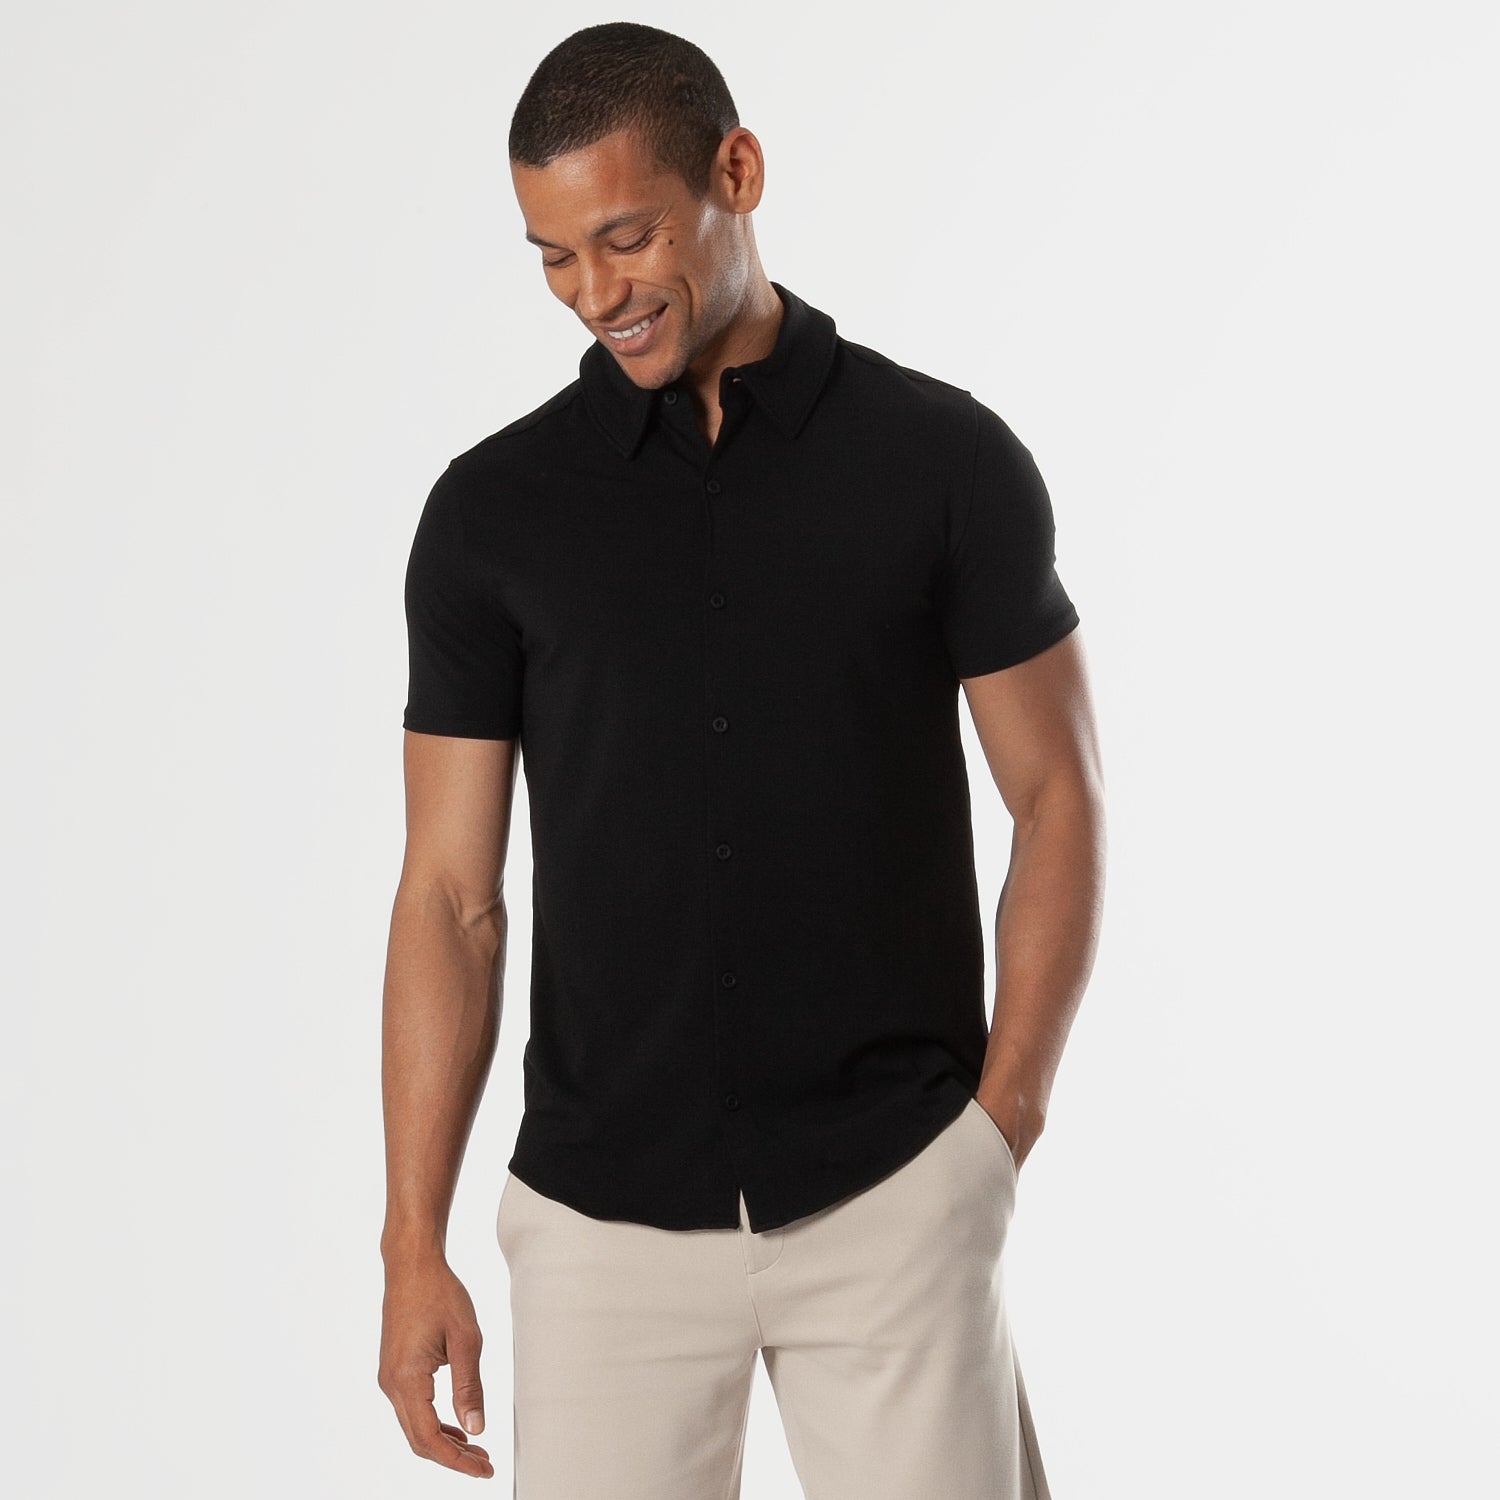 How Should Polo and Button Up Short Sleeve Shirts Fit